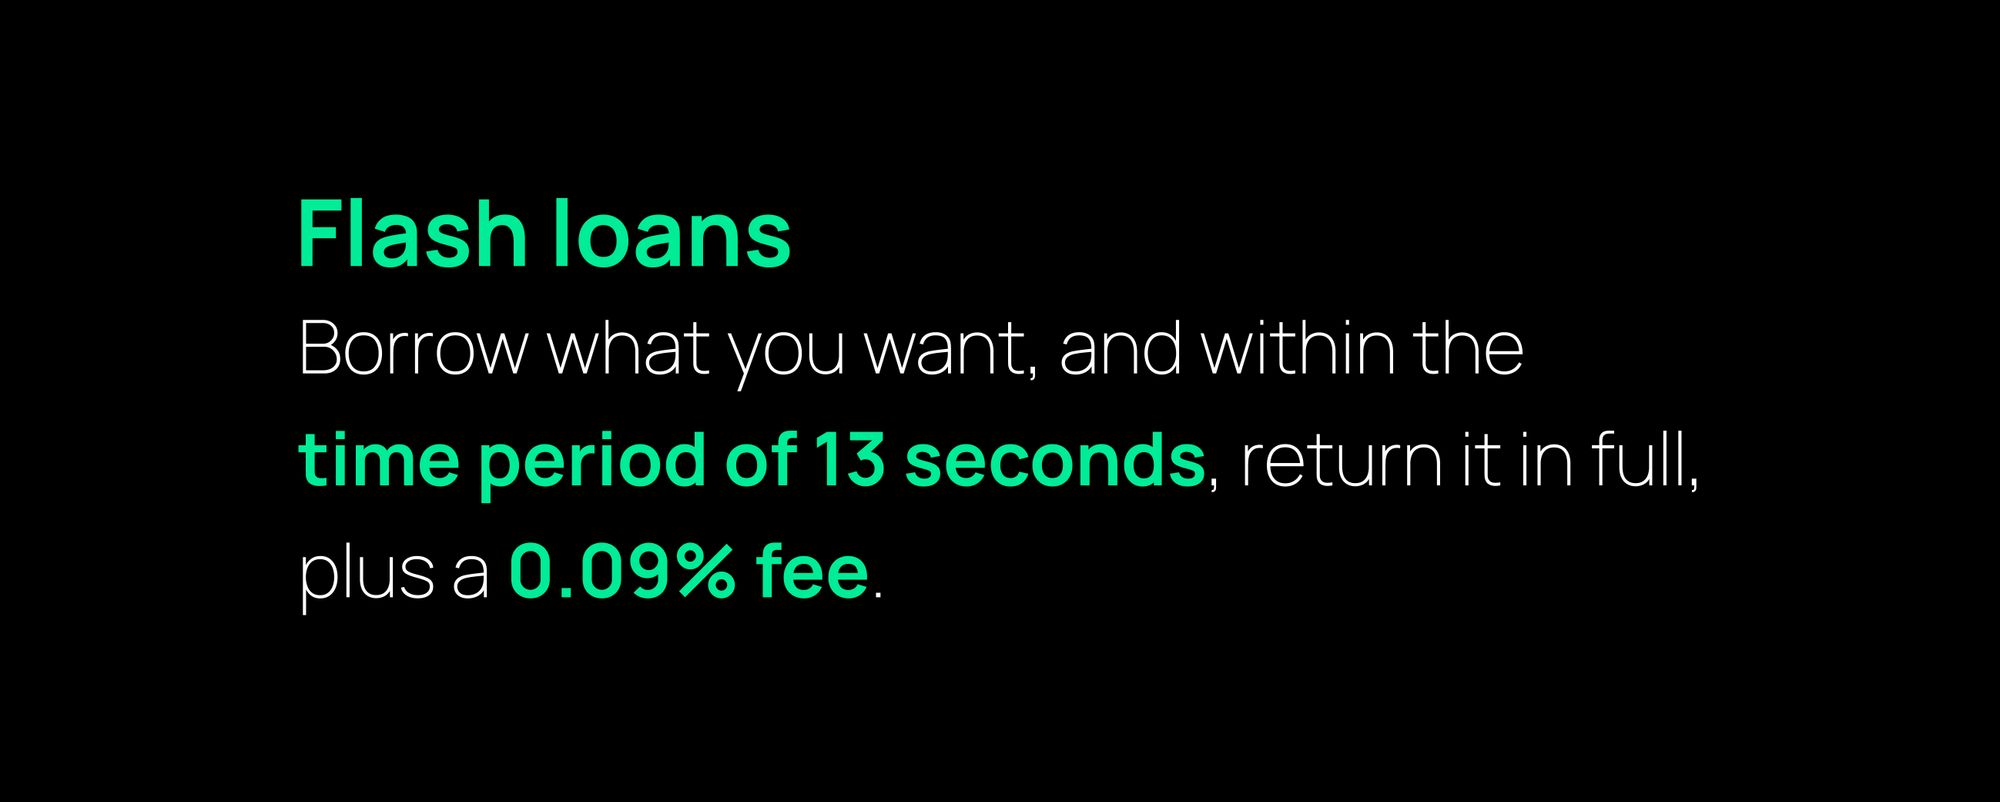 Flash loans - Borrow and return in 13 seconds